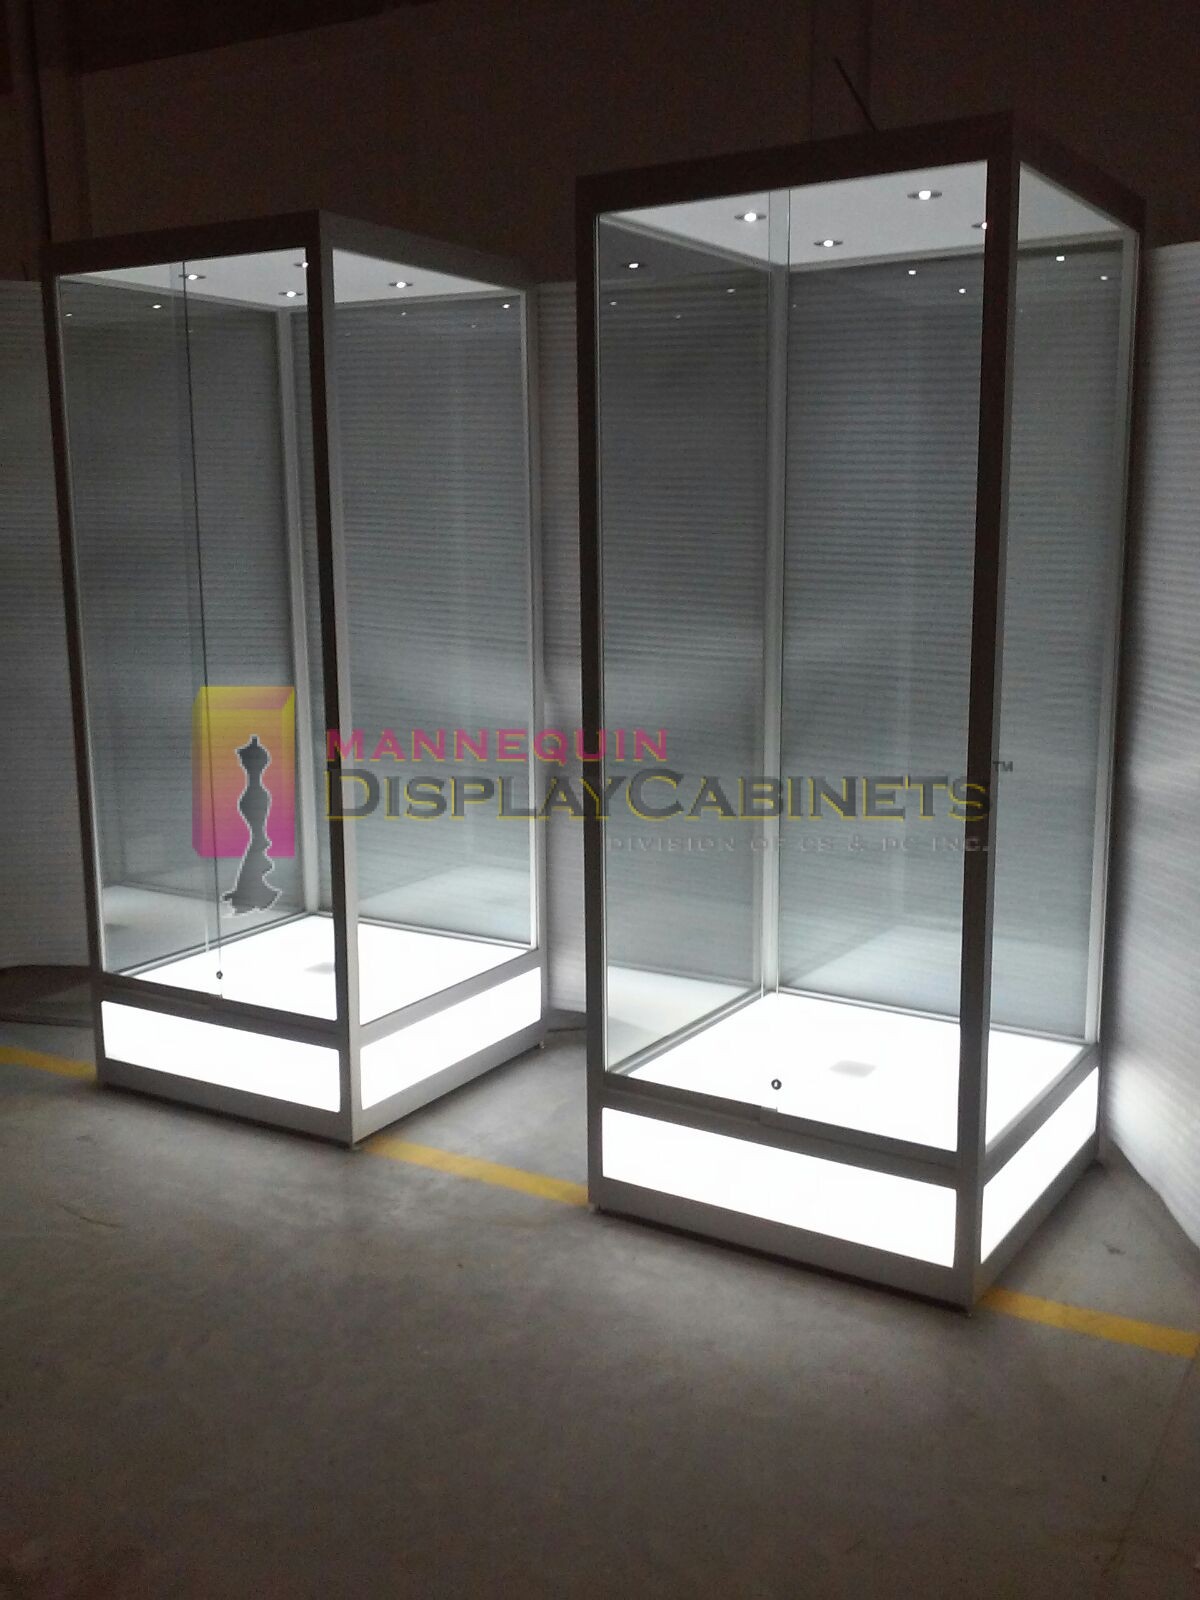 WHY CHOOSE MANNEQUIN DISPLAY CABINETS?